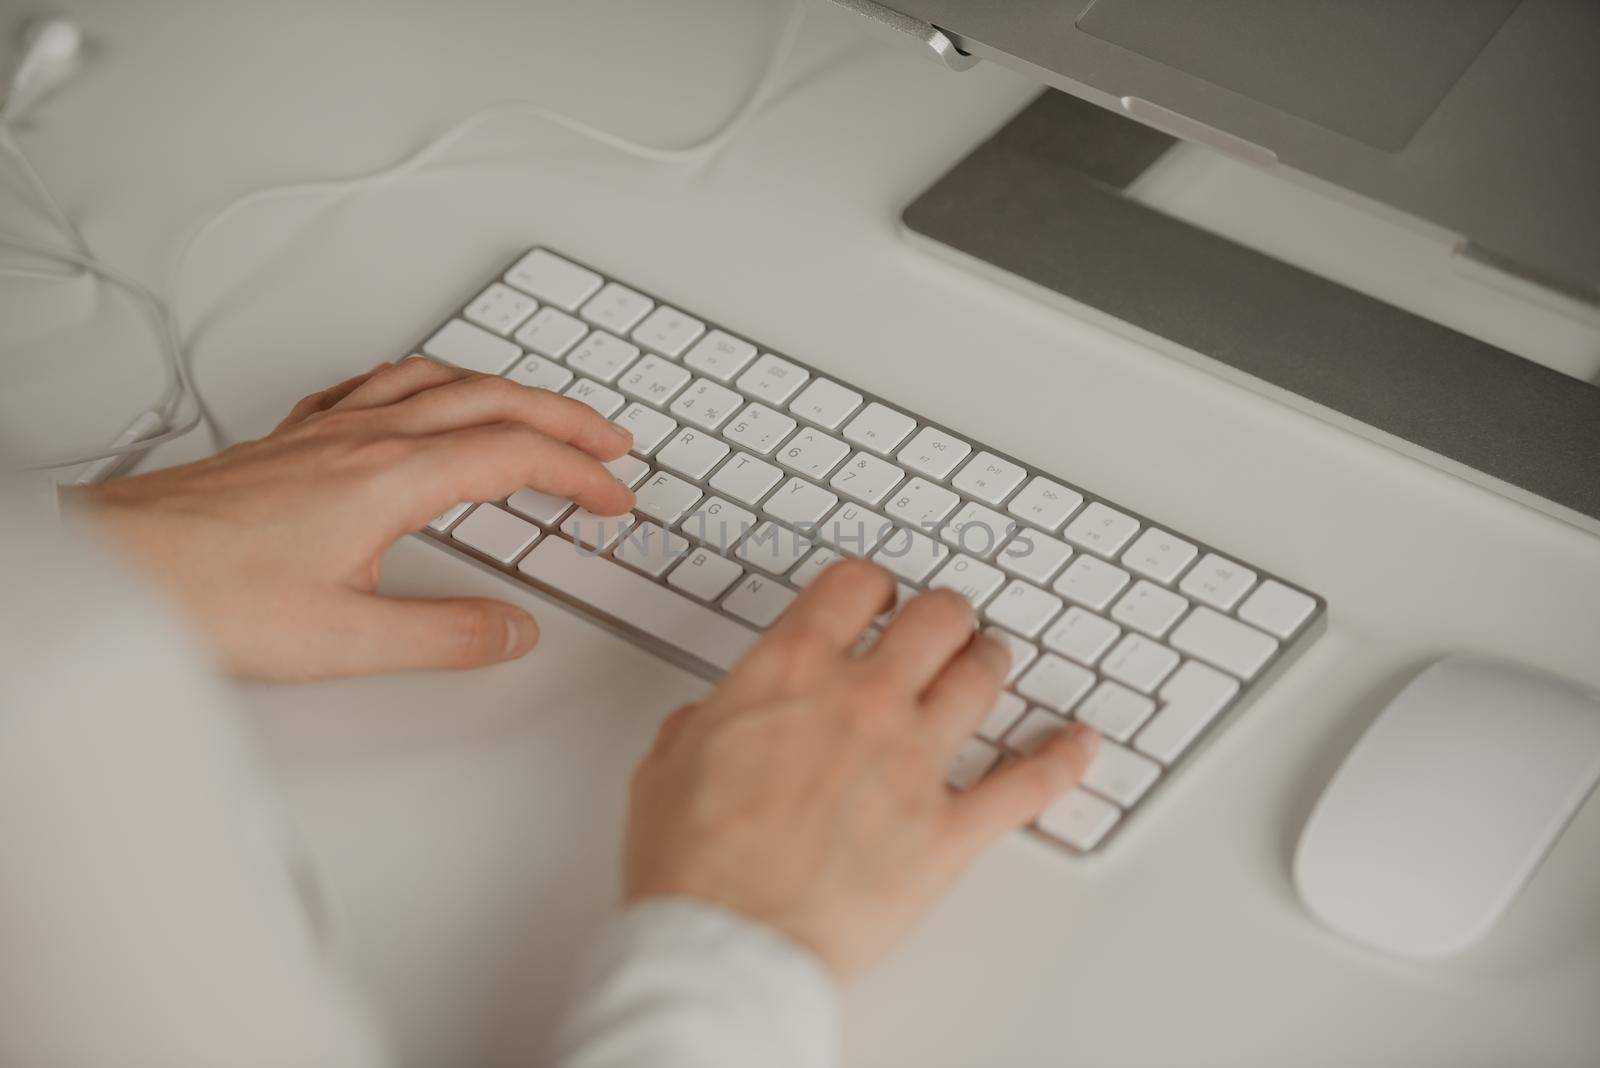 A workplace with an English keyboard. Close-up photo of woman’s hands typing on a wireless white keyboard. Aluminum laptop, headphones, keyboard, mouse.